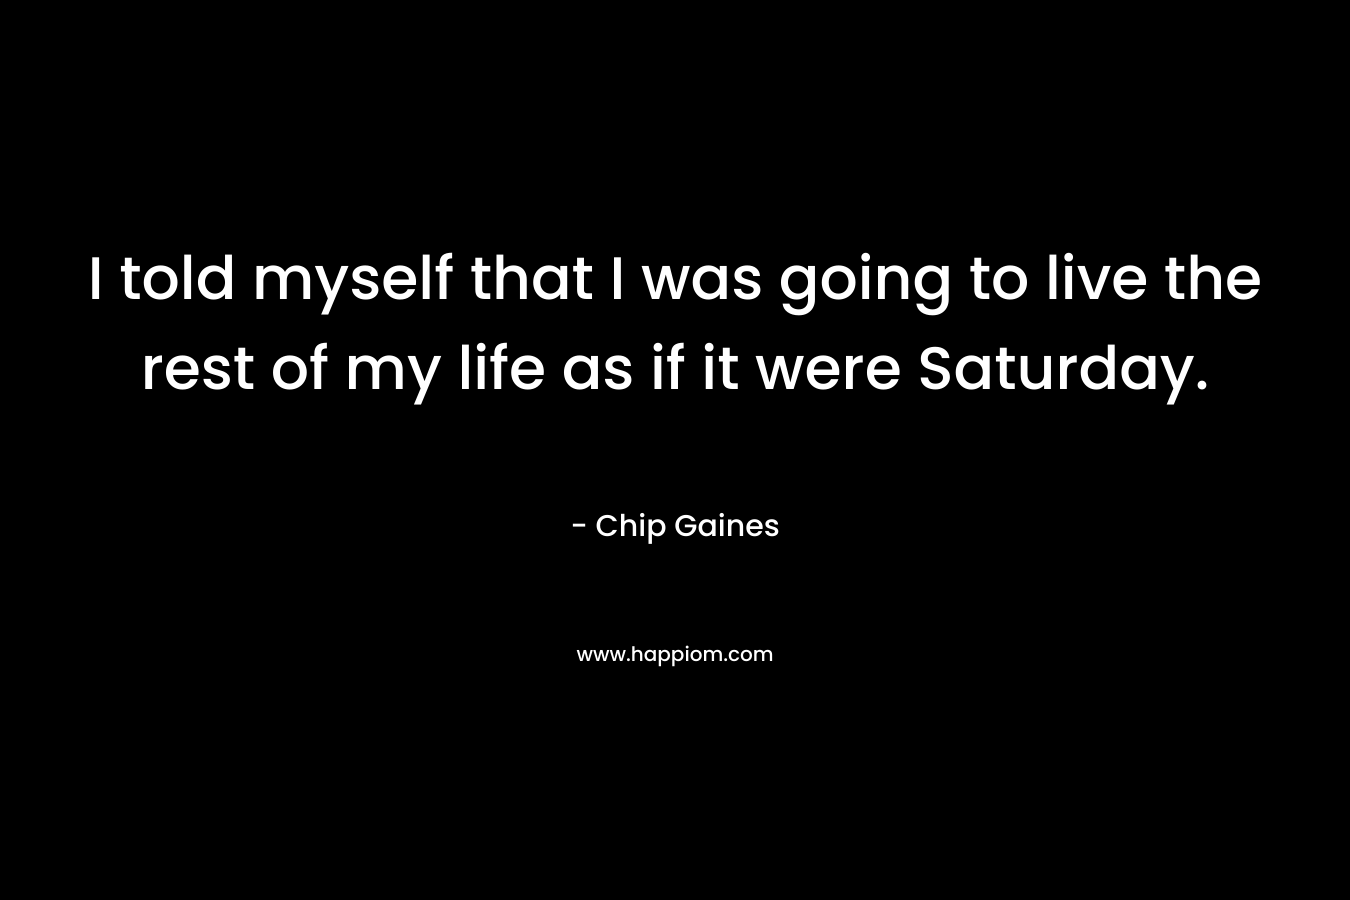 I told myself that I was going to live the rest of my life as if it were Saturday. – Chip Gaines